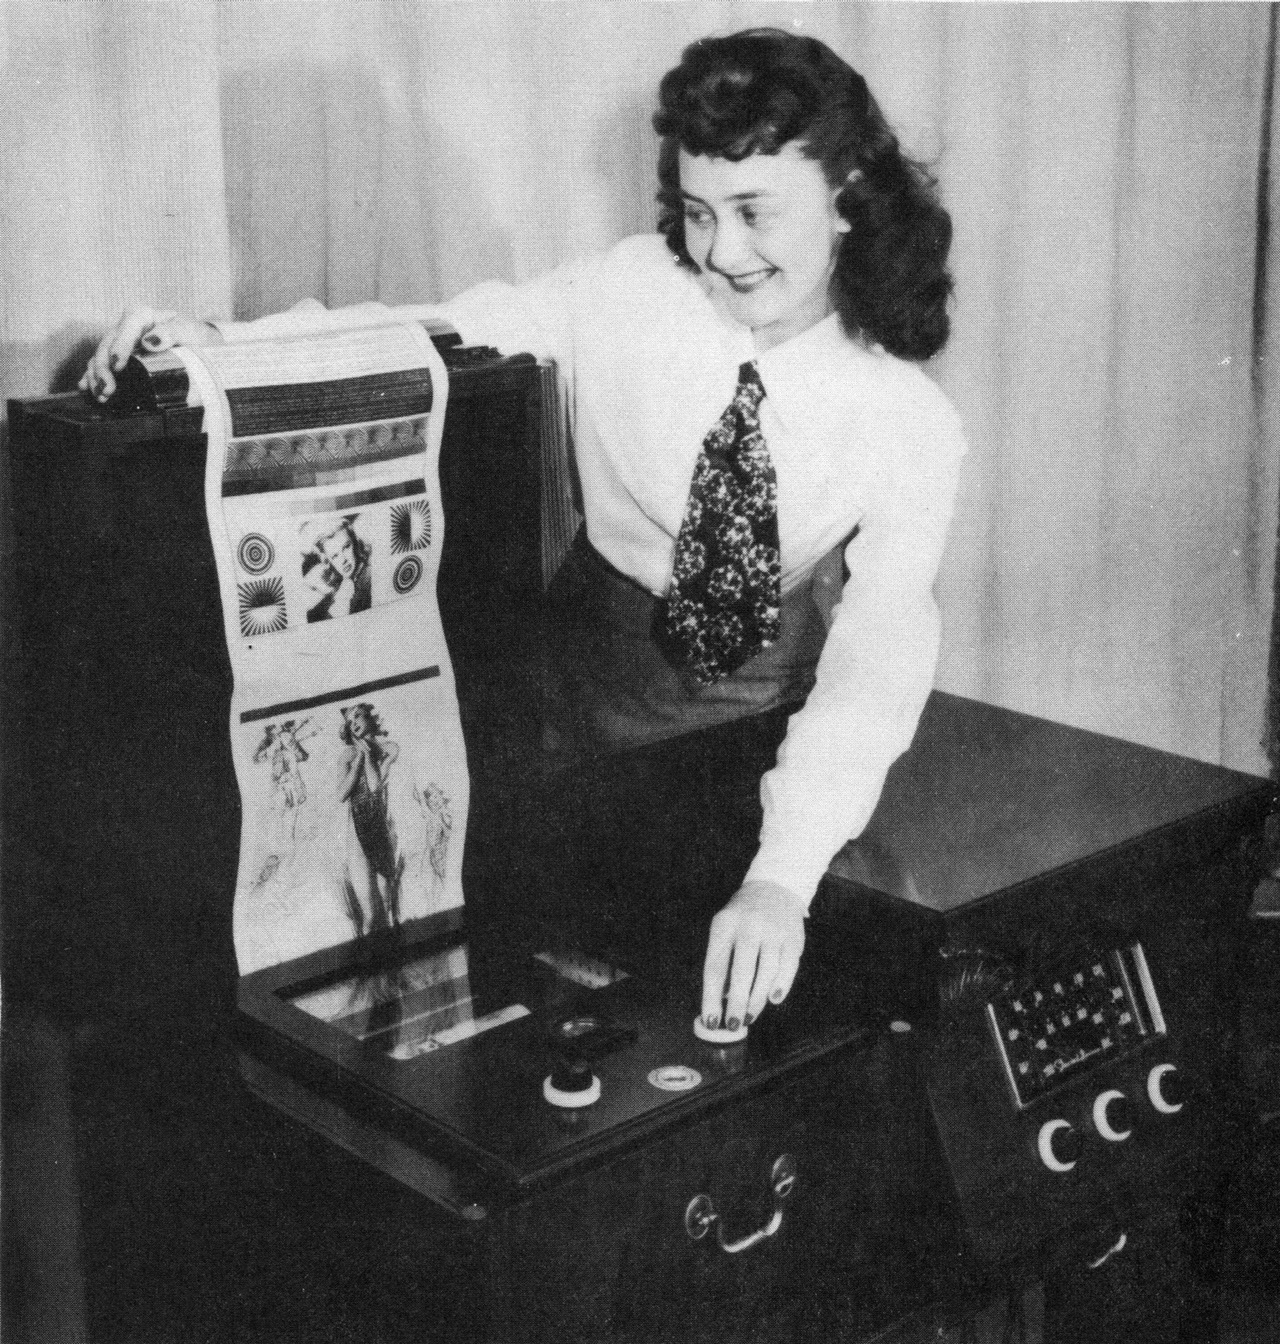 Faxpapers: A Lost 1930s Technology That Delivered Newspapers Via Radio